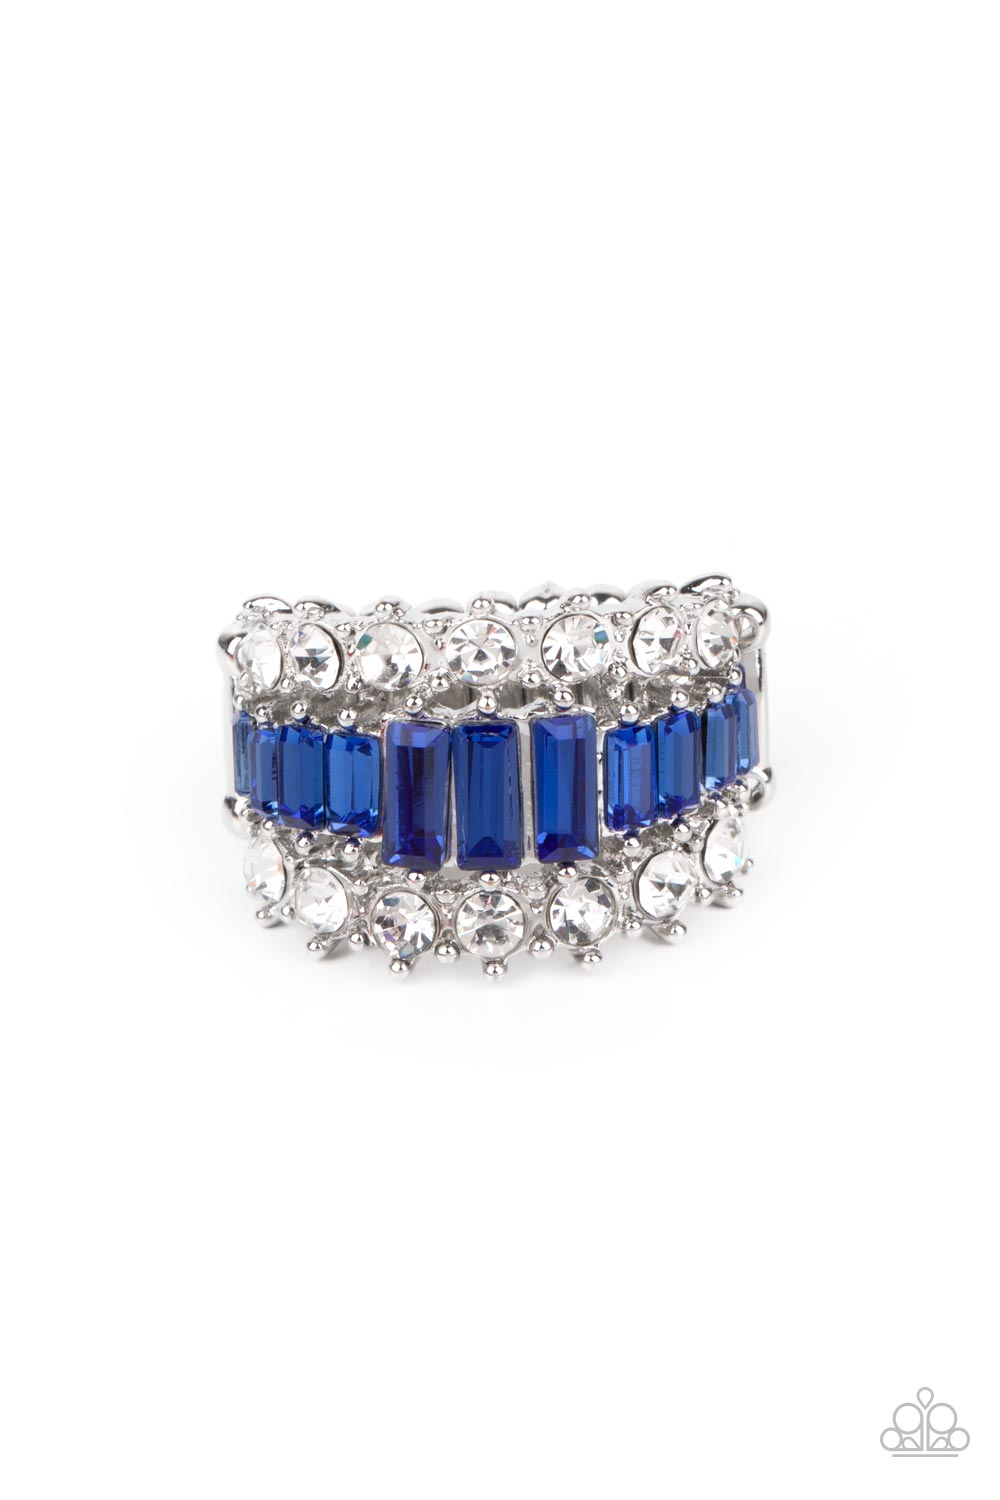 CACHE Value Blue and White Rhinestone Ring - Paparazzi Accessories- lightbox - CarasShop.com - $5 Jewelry by Cara Jewels